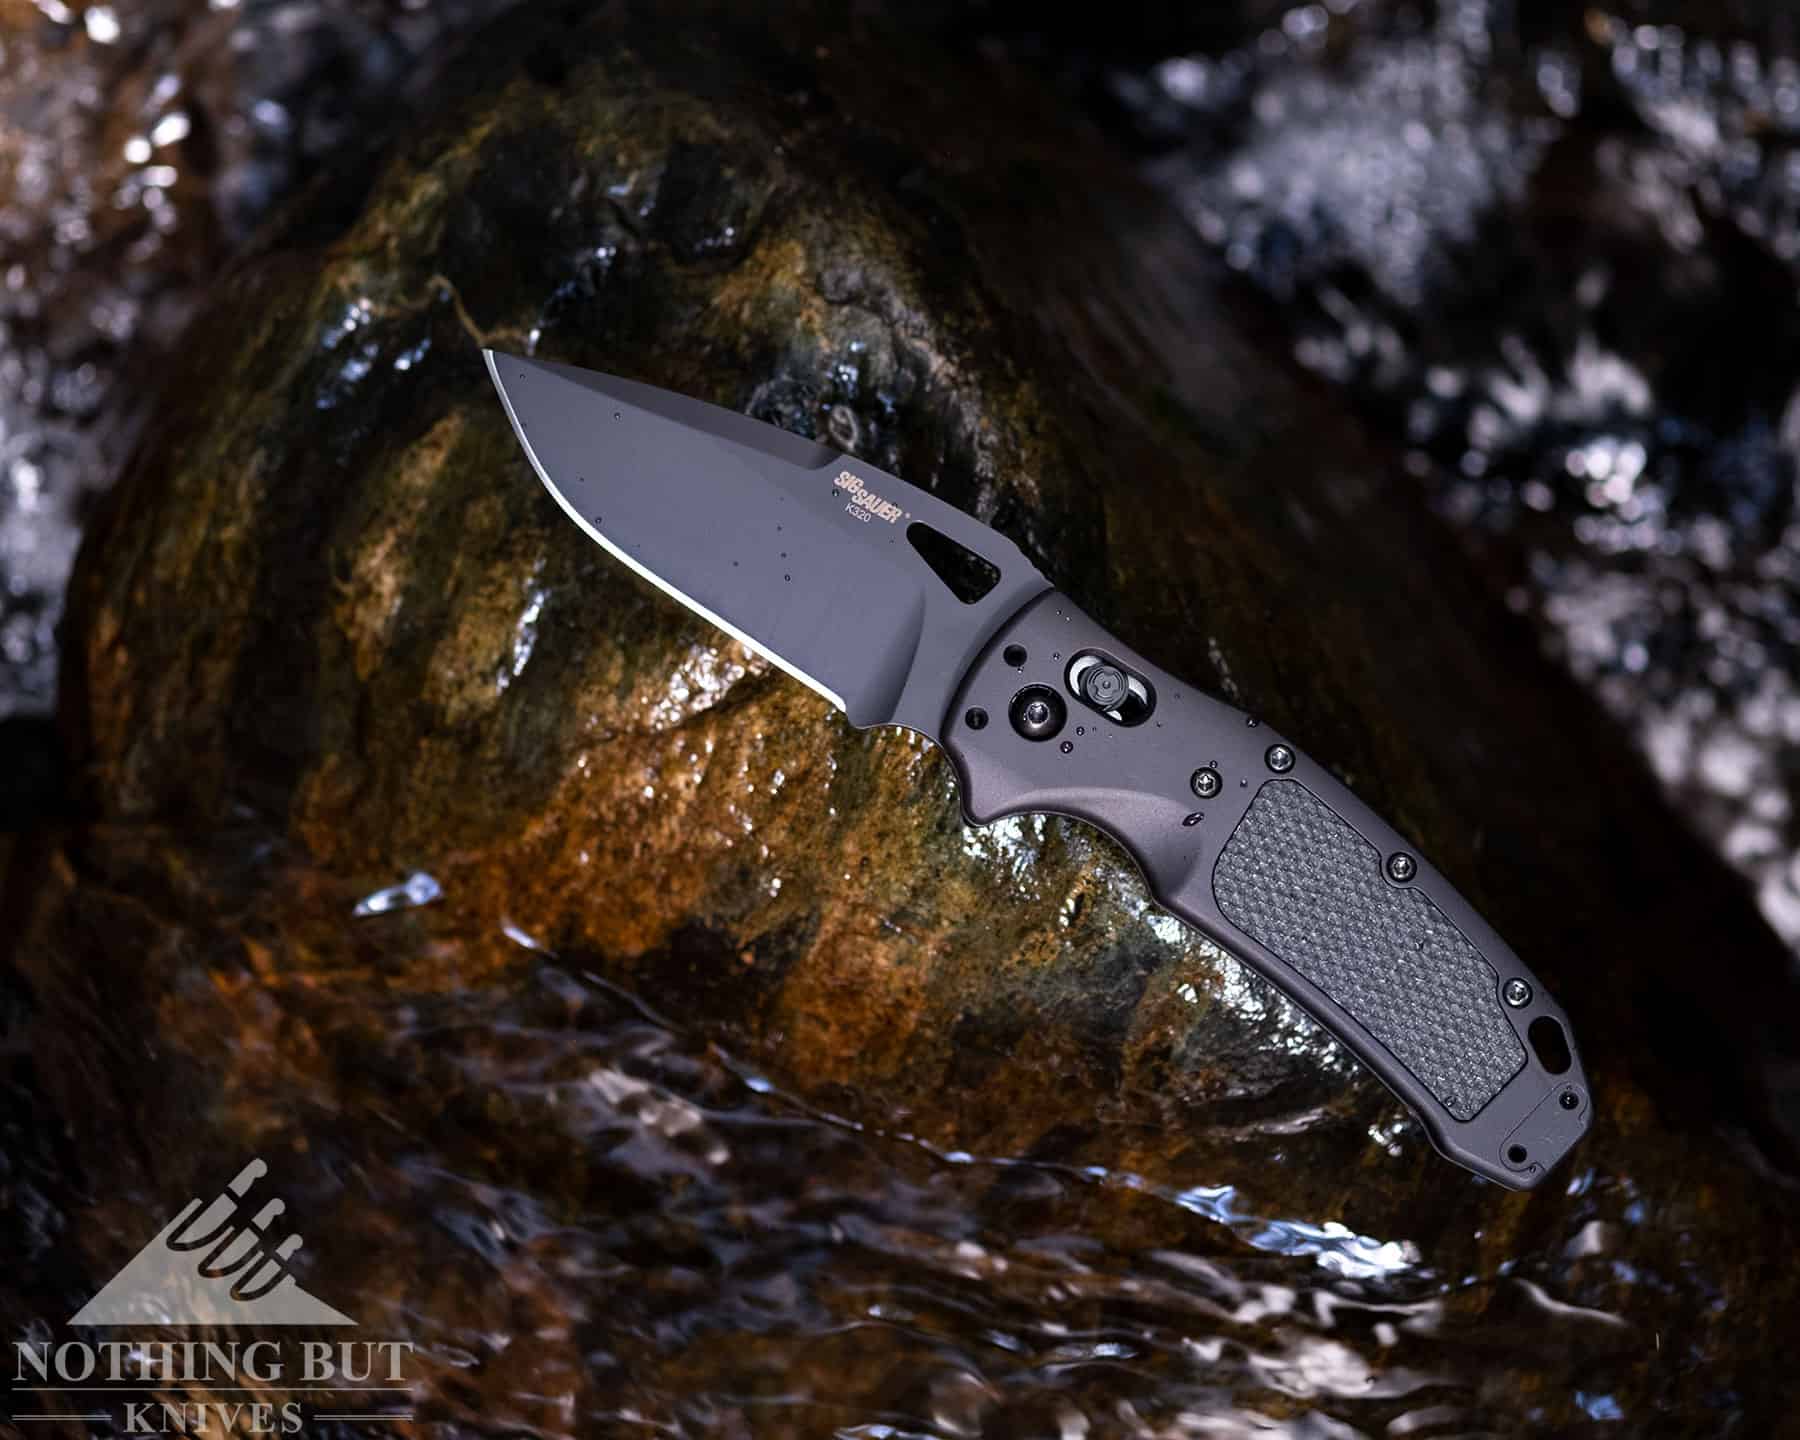 Exploring the wilderness with the Hougue K320 Pro tactical knife.